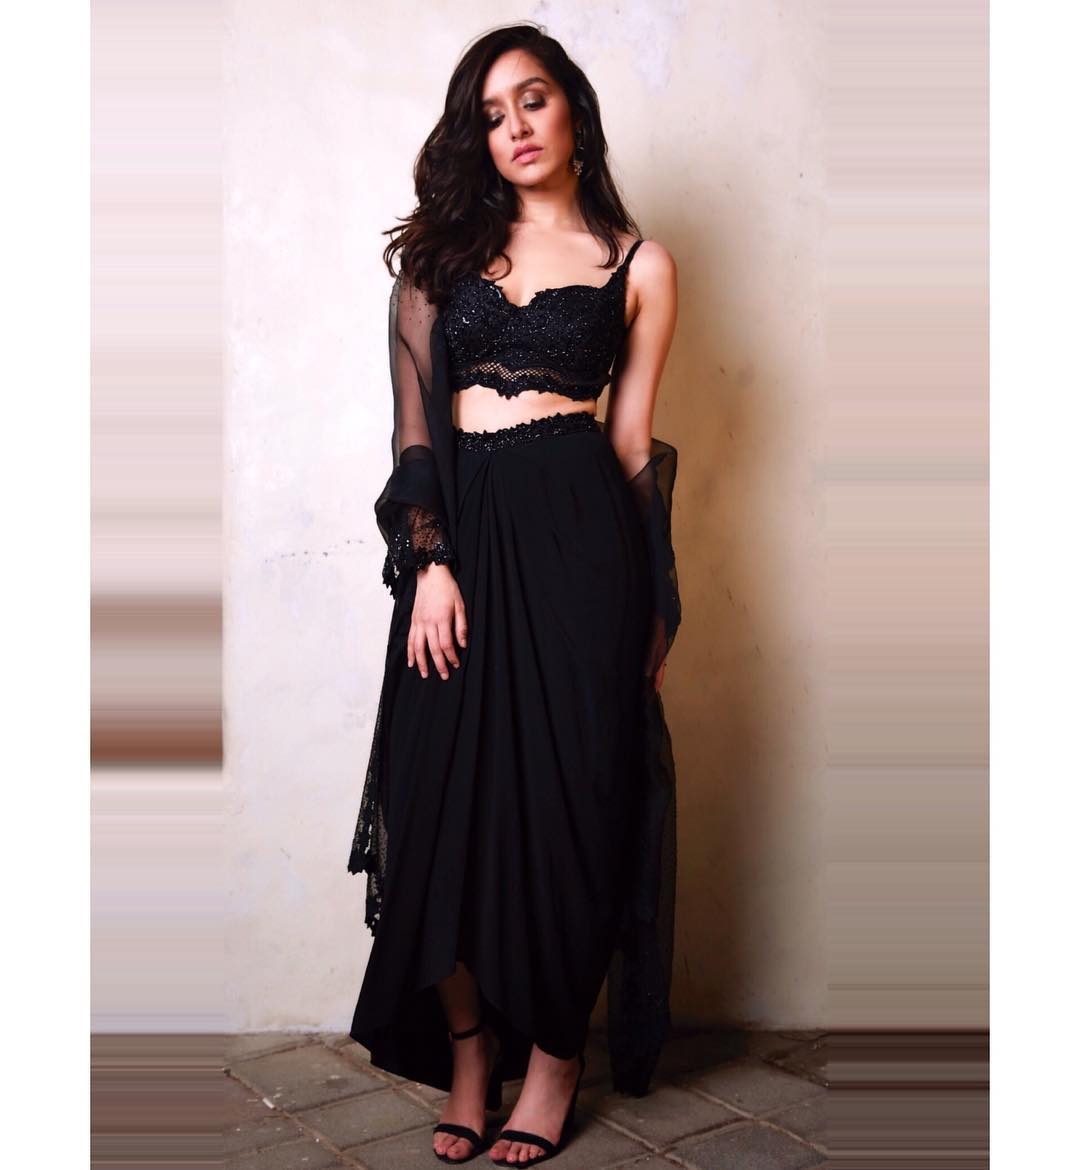  B-Town actresses rocked the color black: